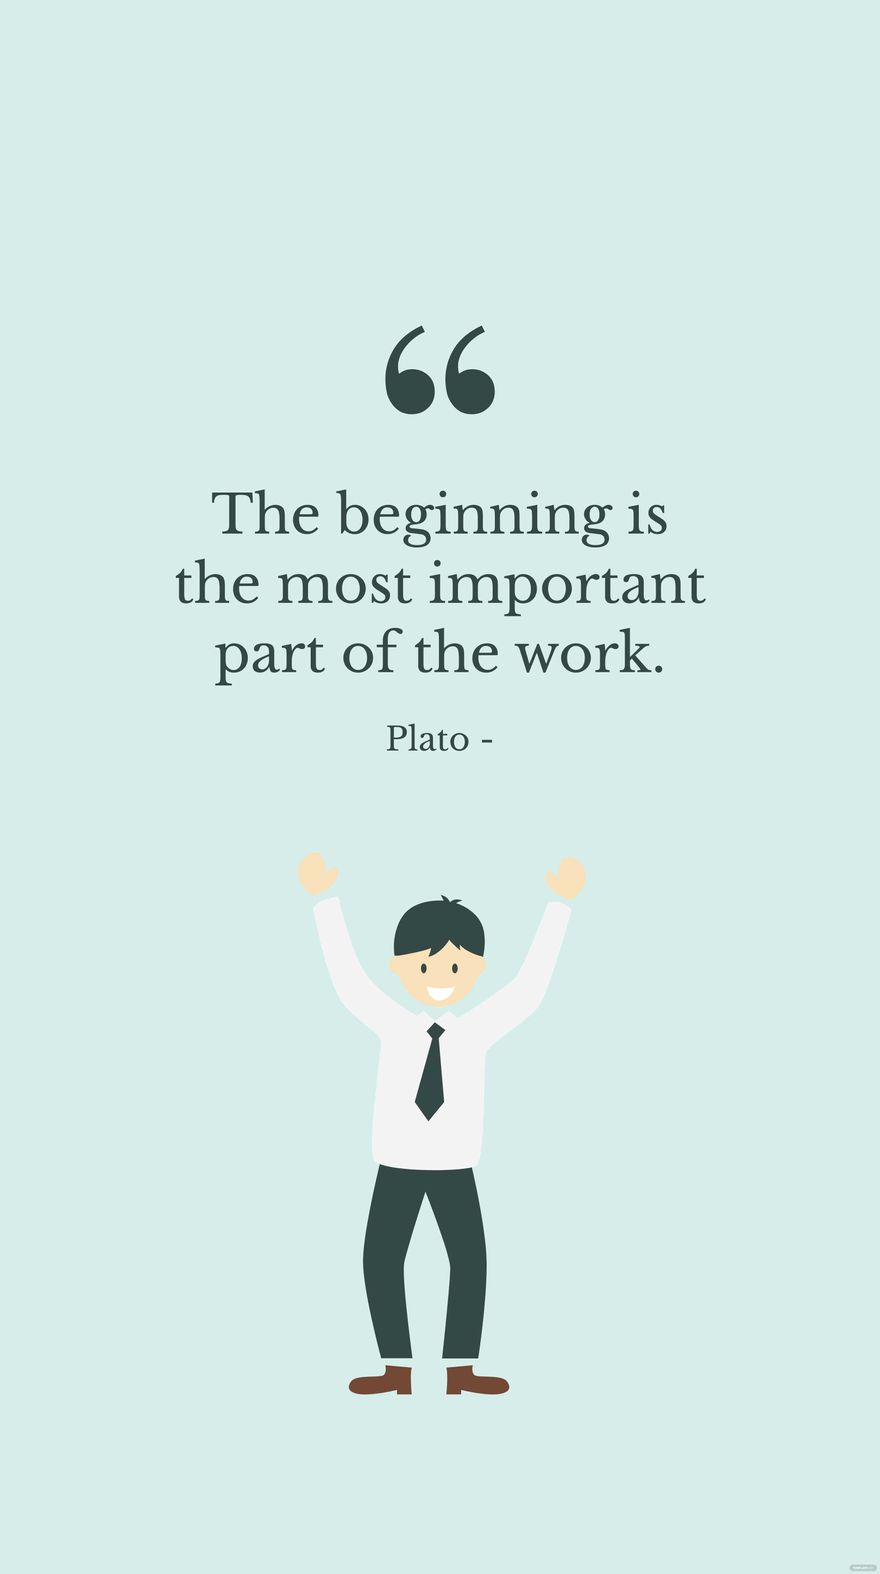 Free Plato - The beginning is the most important part of the work. in JPG